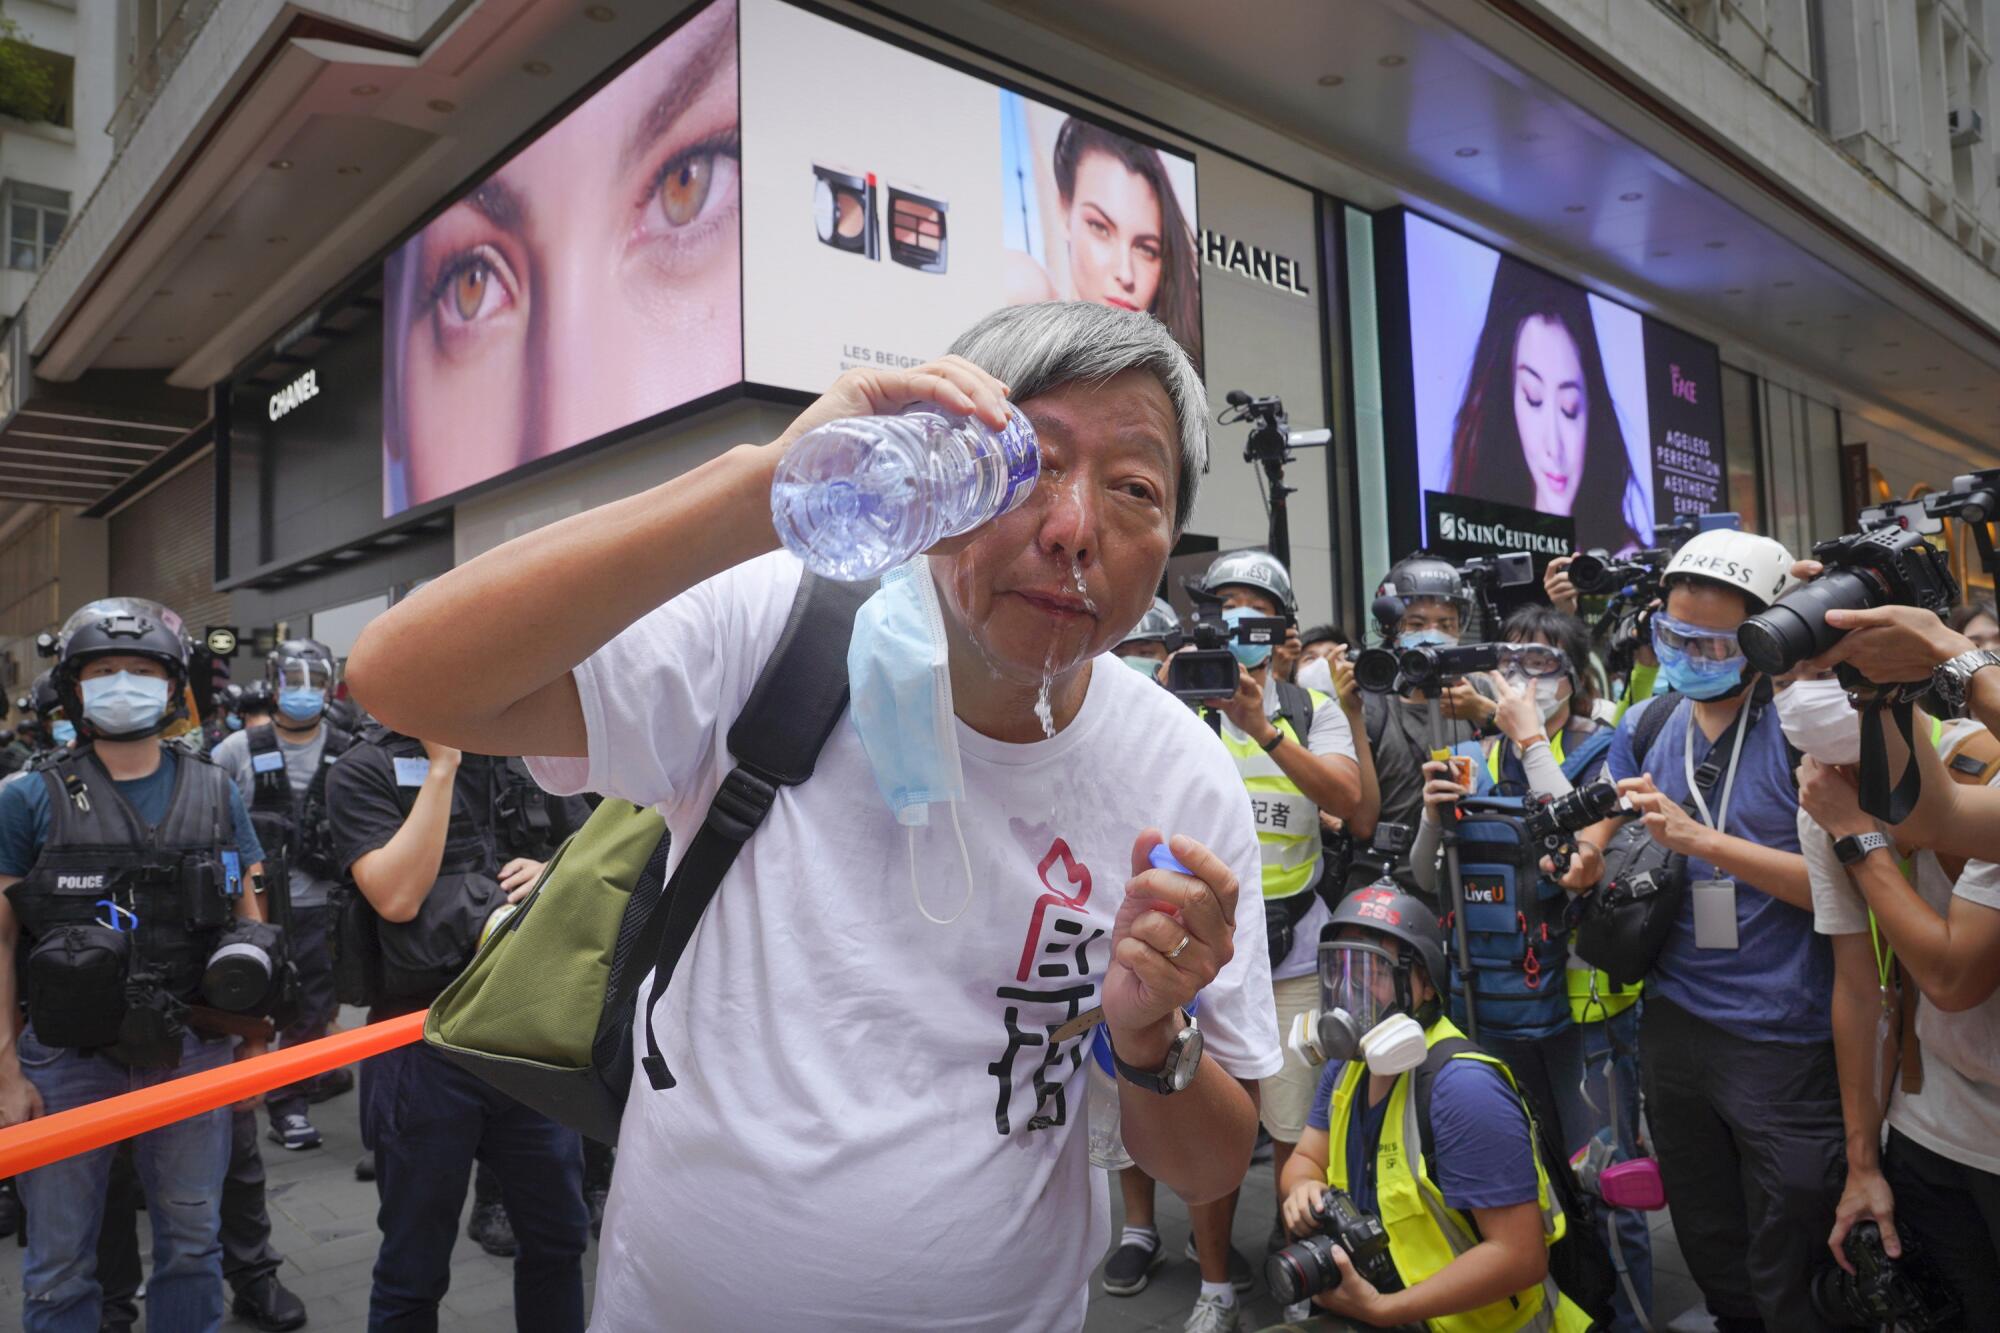 Lee Cheuk-yan washes his eyes with water after being pepper sprayed by Hong Kong police during a demonstration Wednesday.